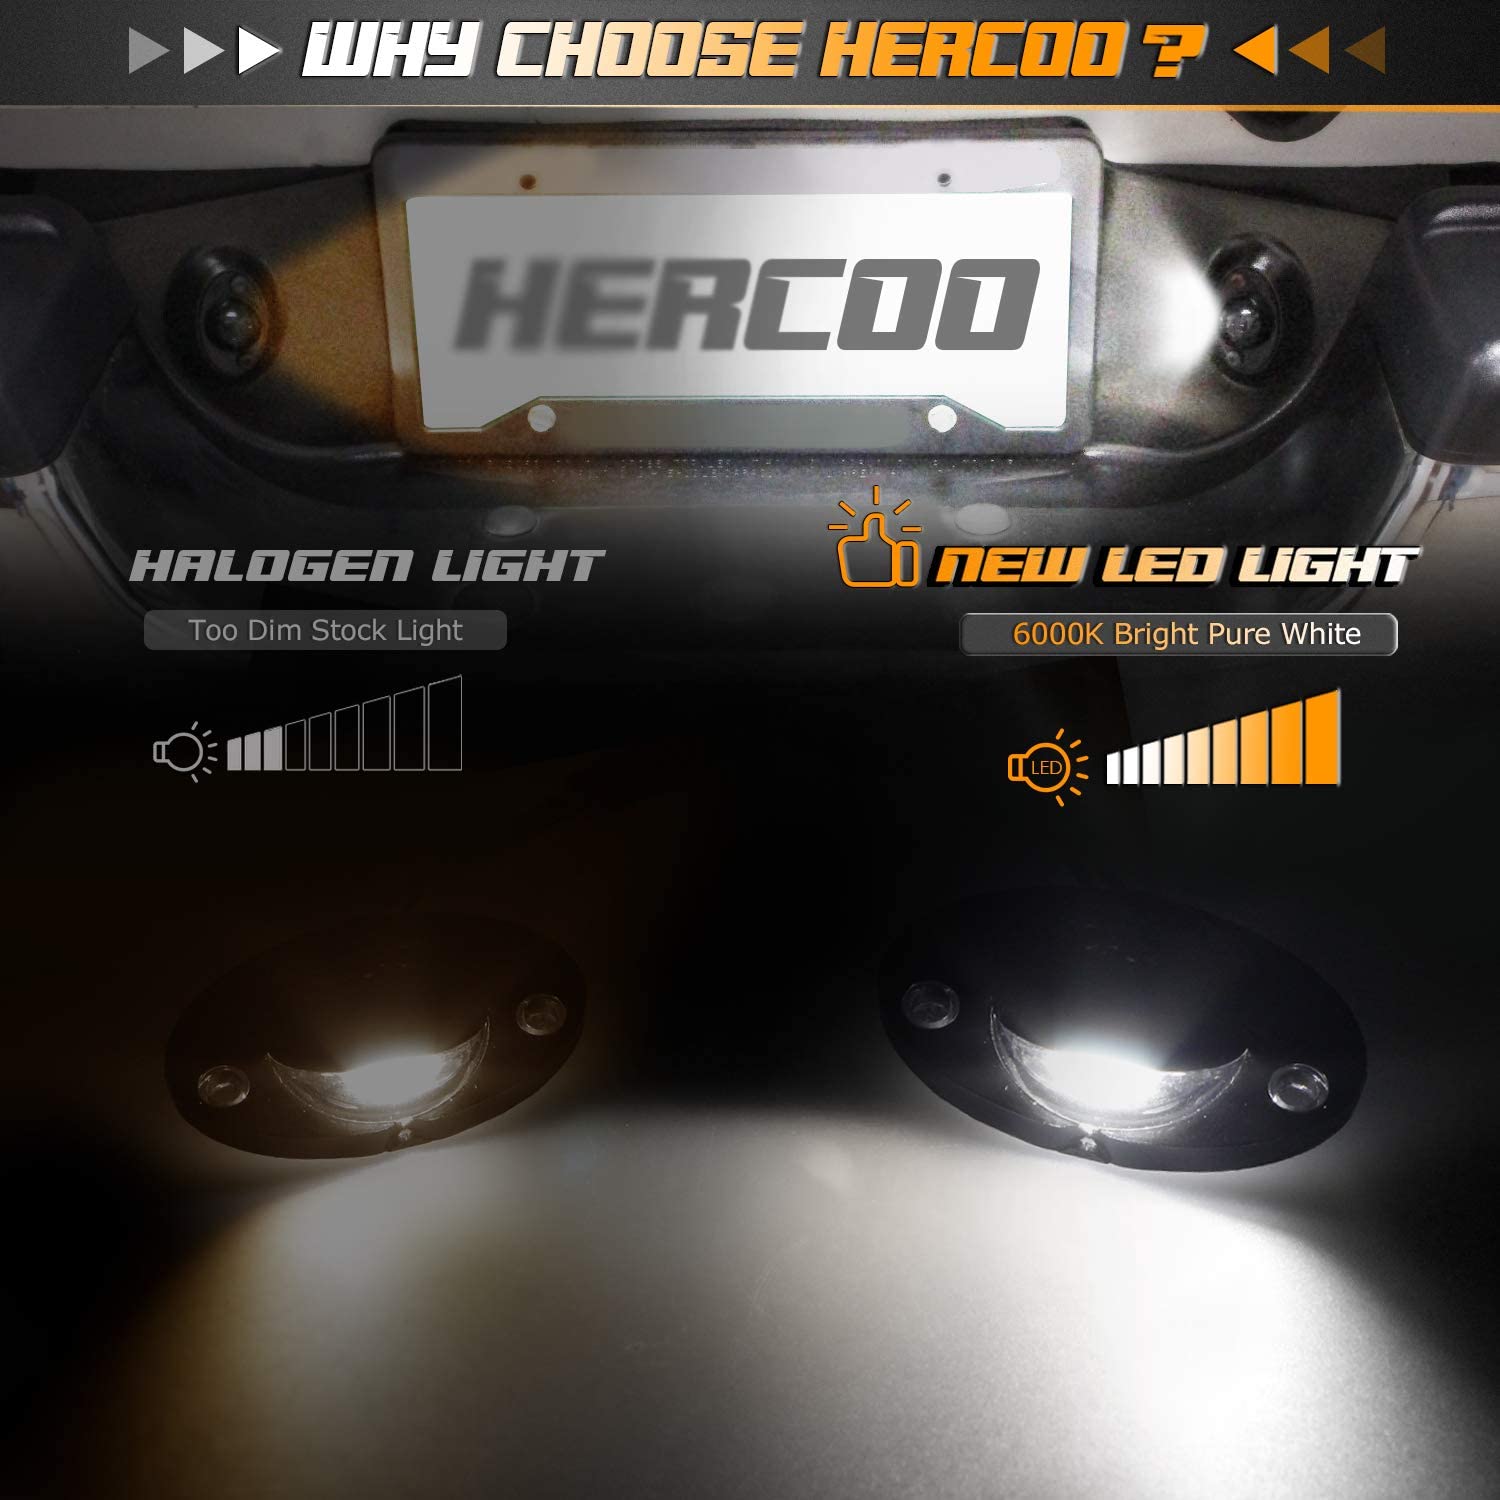 HERCOO LED License Plate Light Lens Rear Lamp Socket Wiring Harness Pigtail Black Housing Compatible with 1994 1995 1996 1997 1998 1999 2000 2001 2002 Dodge Ram 1500 2500 3500 Pickup Truck Step Bumper